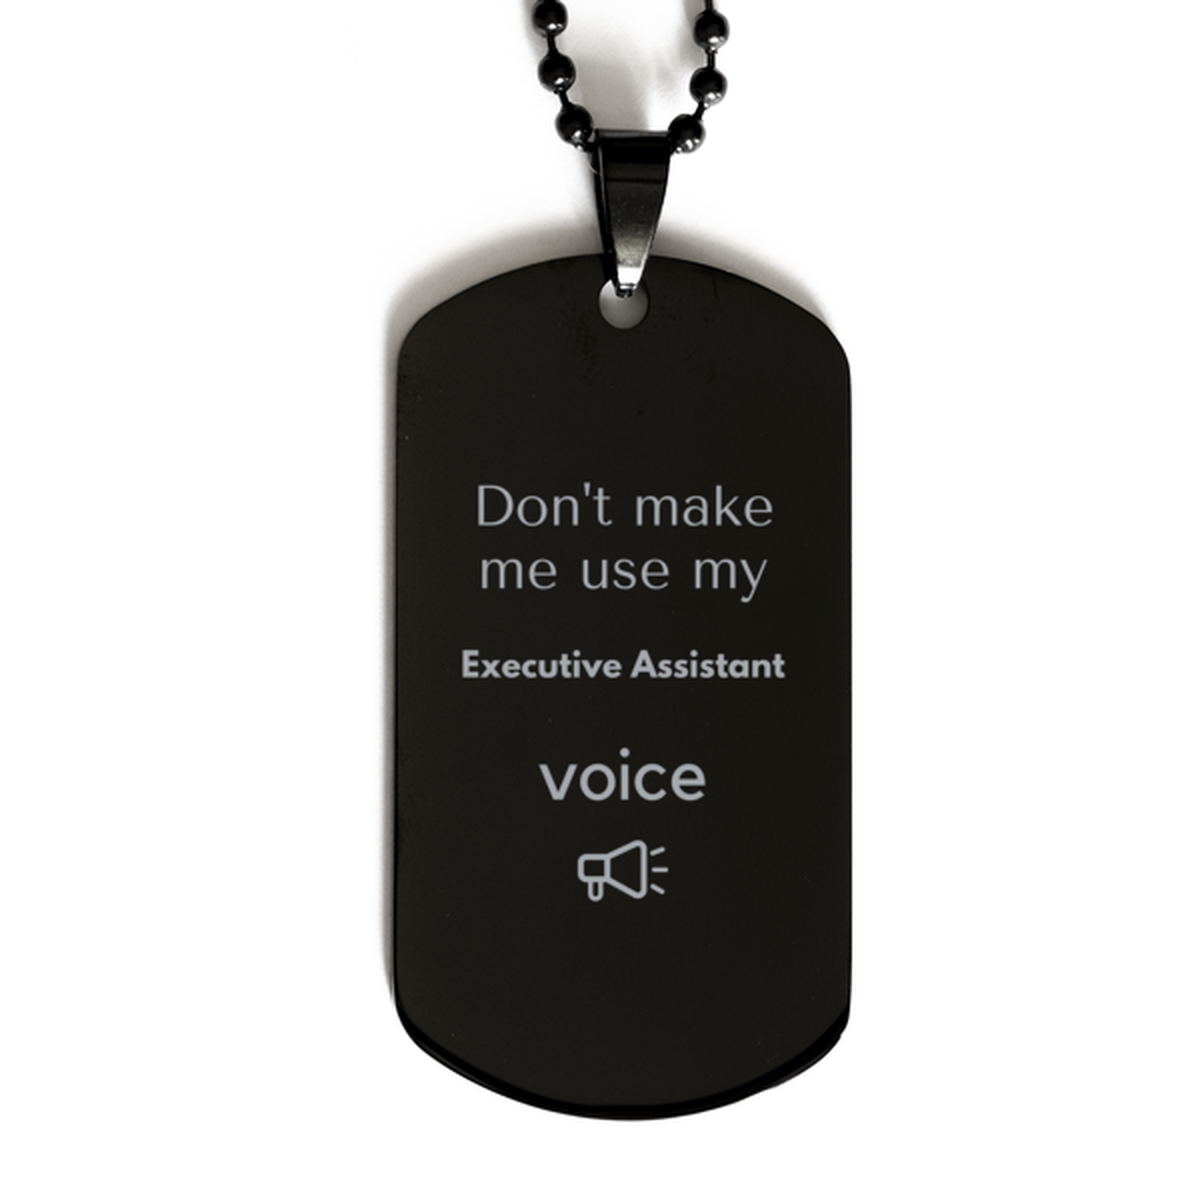 Don't make me use my Executive Assistant voice, Sarcasm Executive Assistant Gifts, Christmas Executive Assistant Black Dog Tag Birthday Unique Gifts For Executive Assistant Coworkers, Men, Women, Colleague, Friends